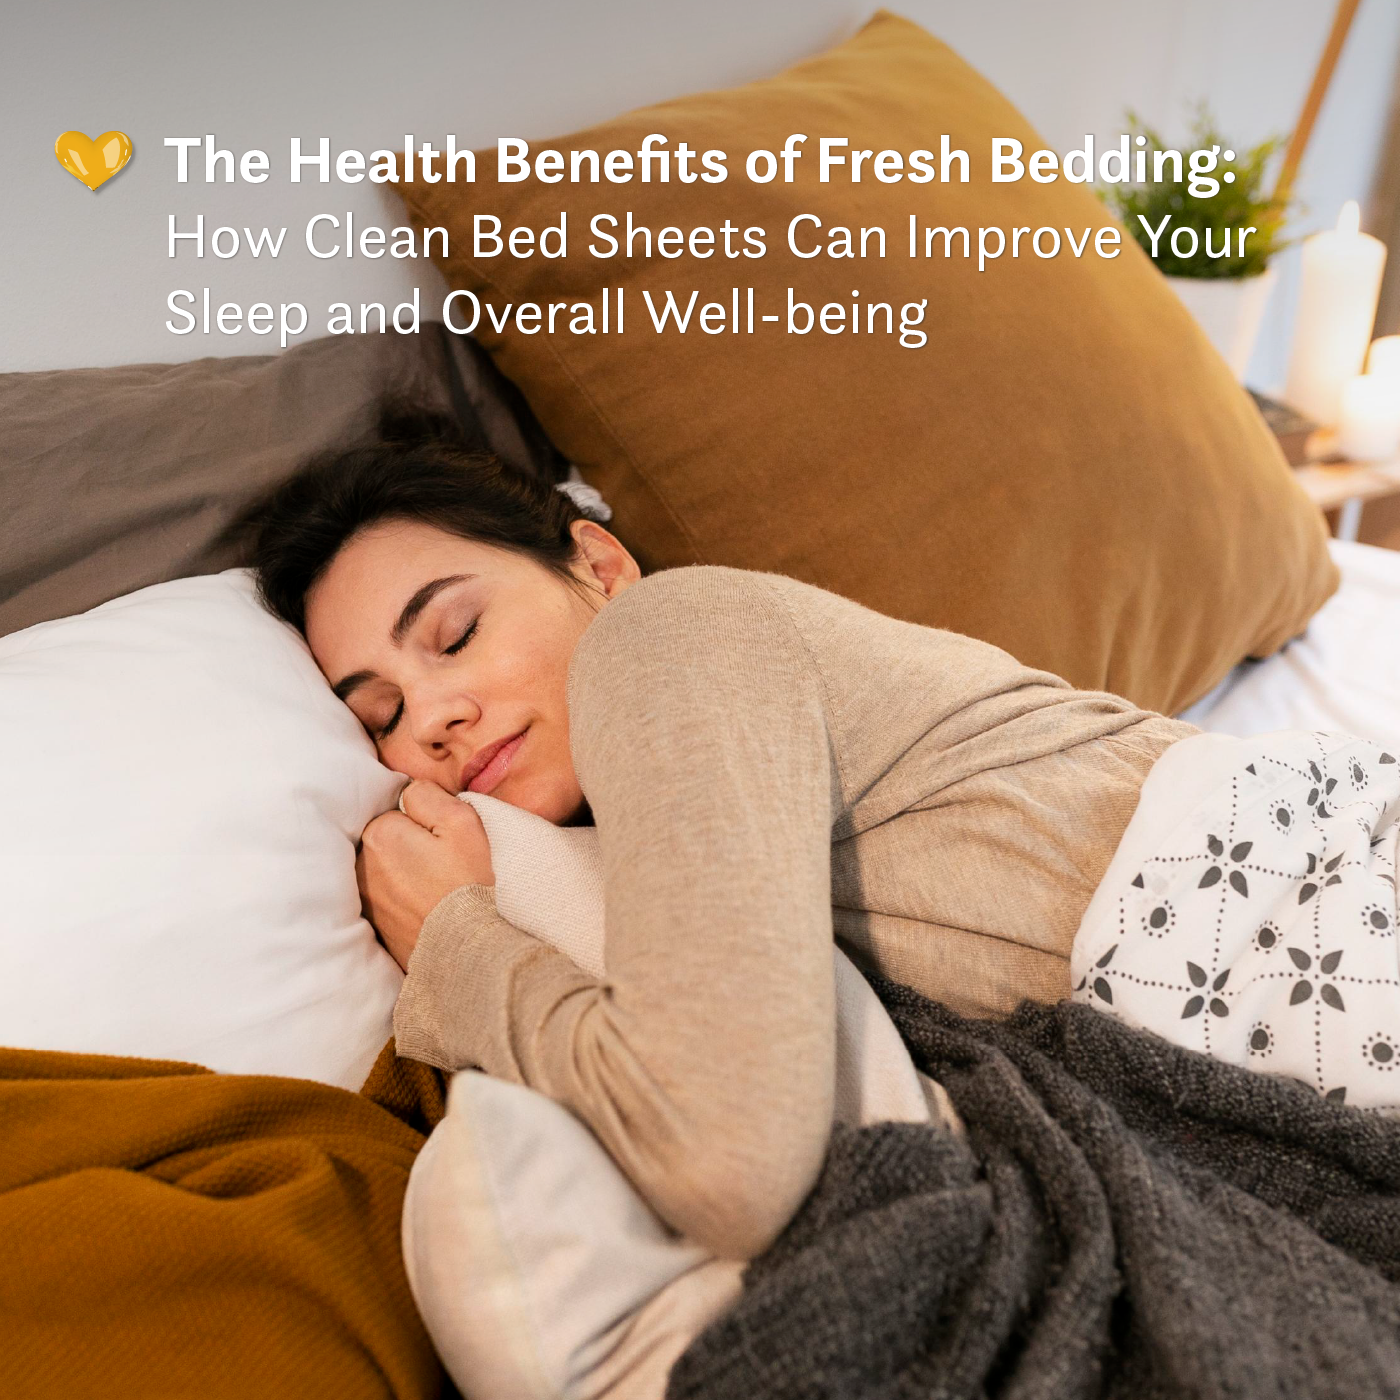 The Health Benefits of Fresh Bedding: How Clean Bed Sheets Can Improve Your Sleep and Overall Well-being